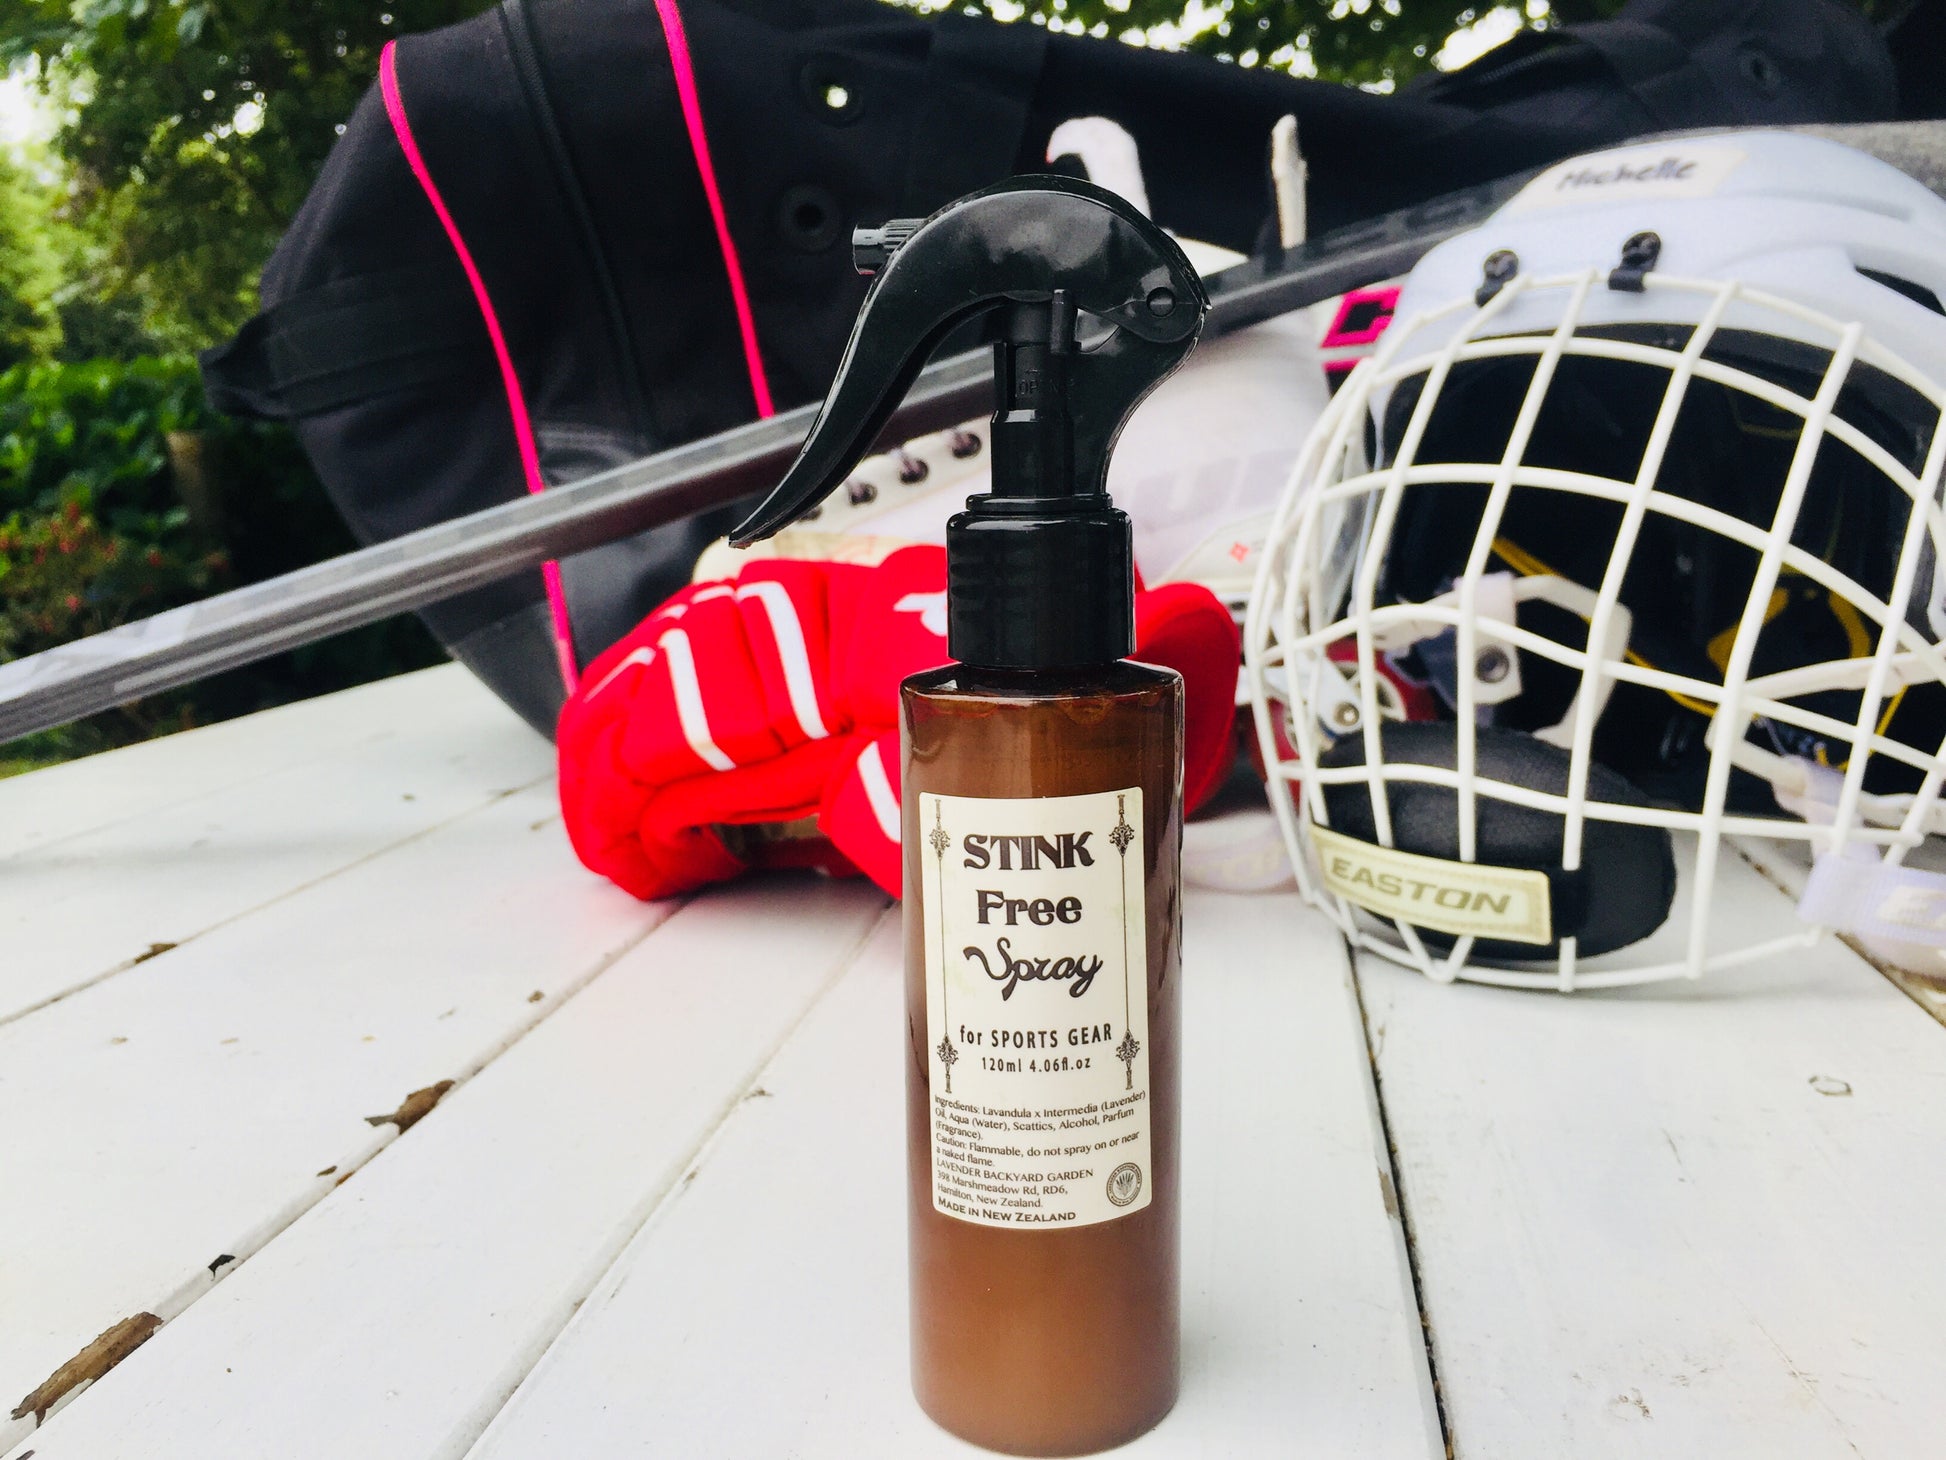 NZ Lavender Products: Stink Free Spray for Sports Gear